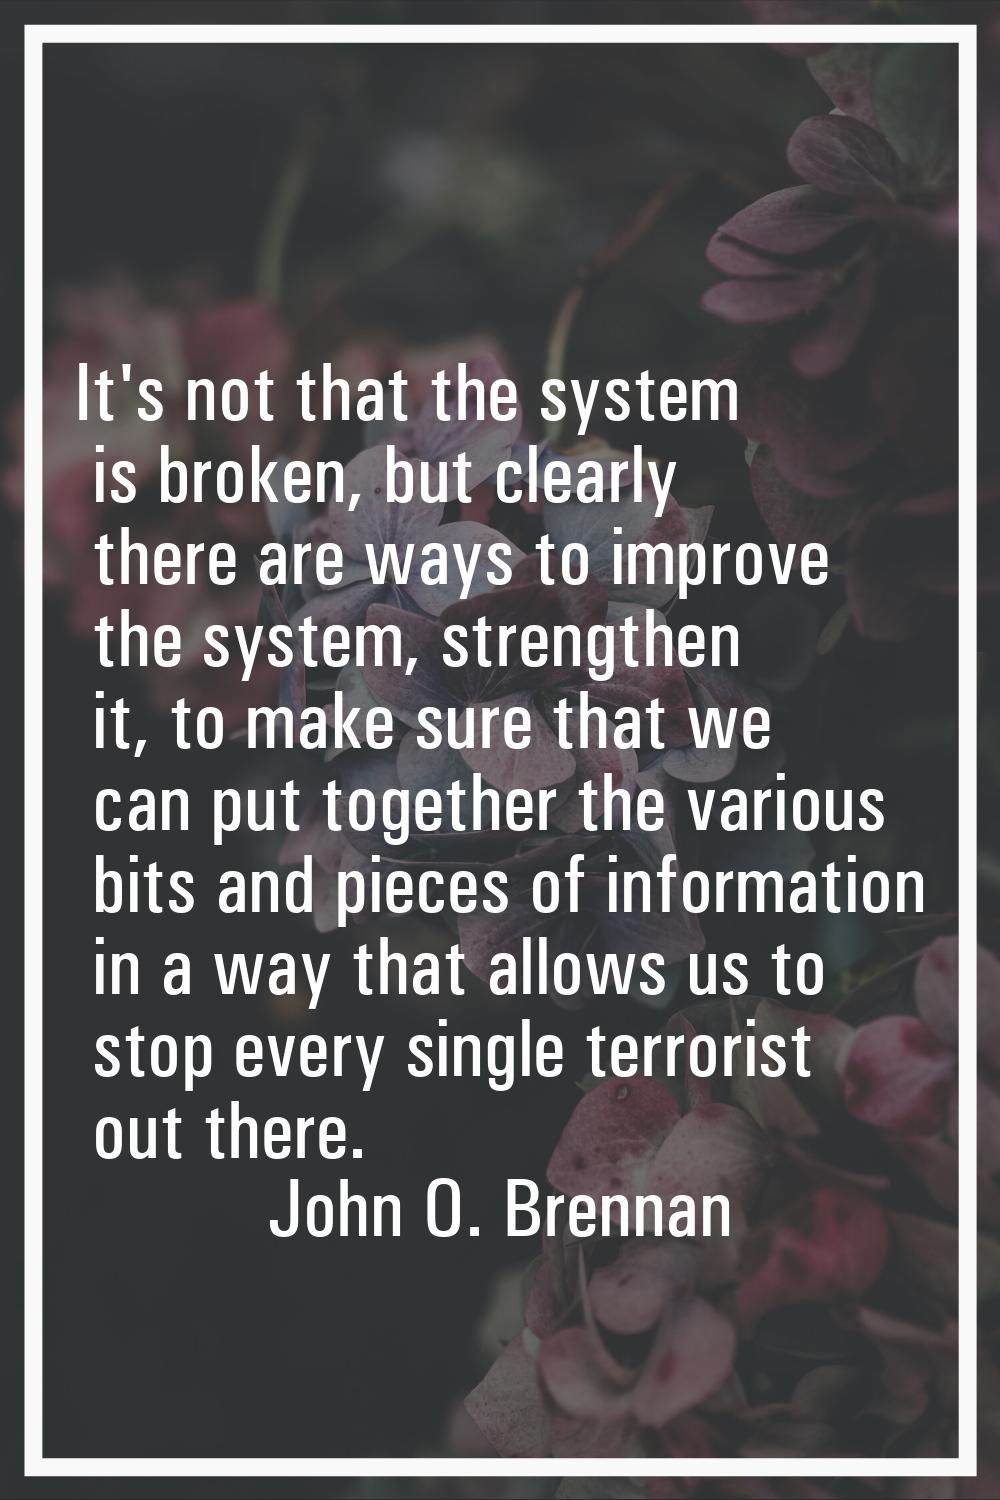 It's not that the system is broken, but clearly there are ways to improve the system, strengthen it